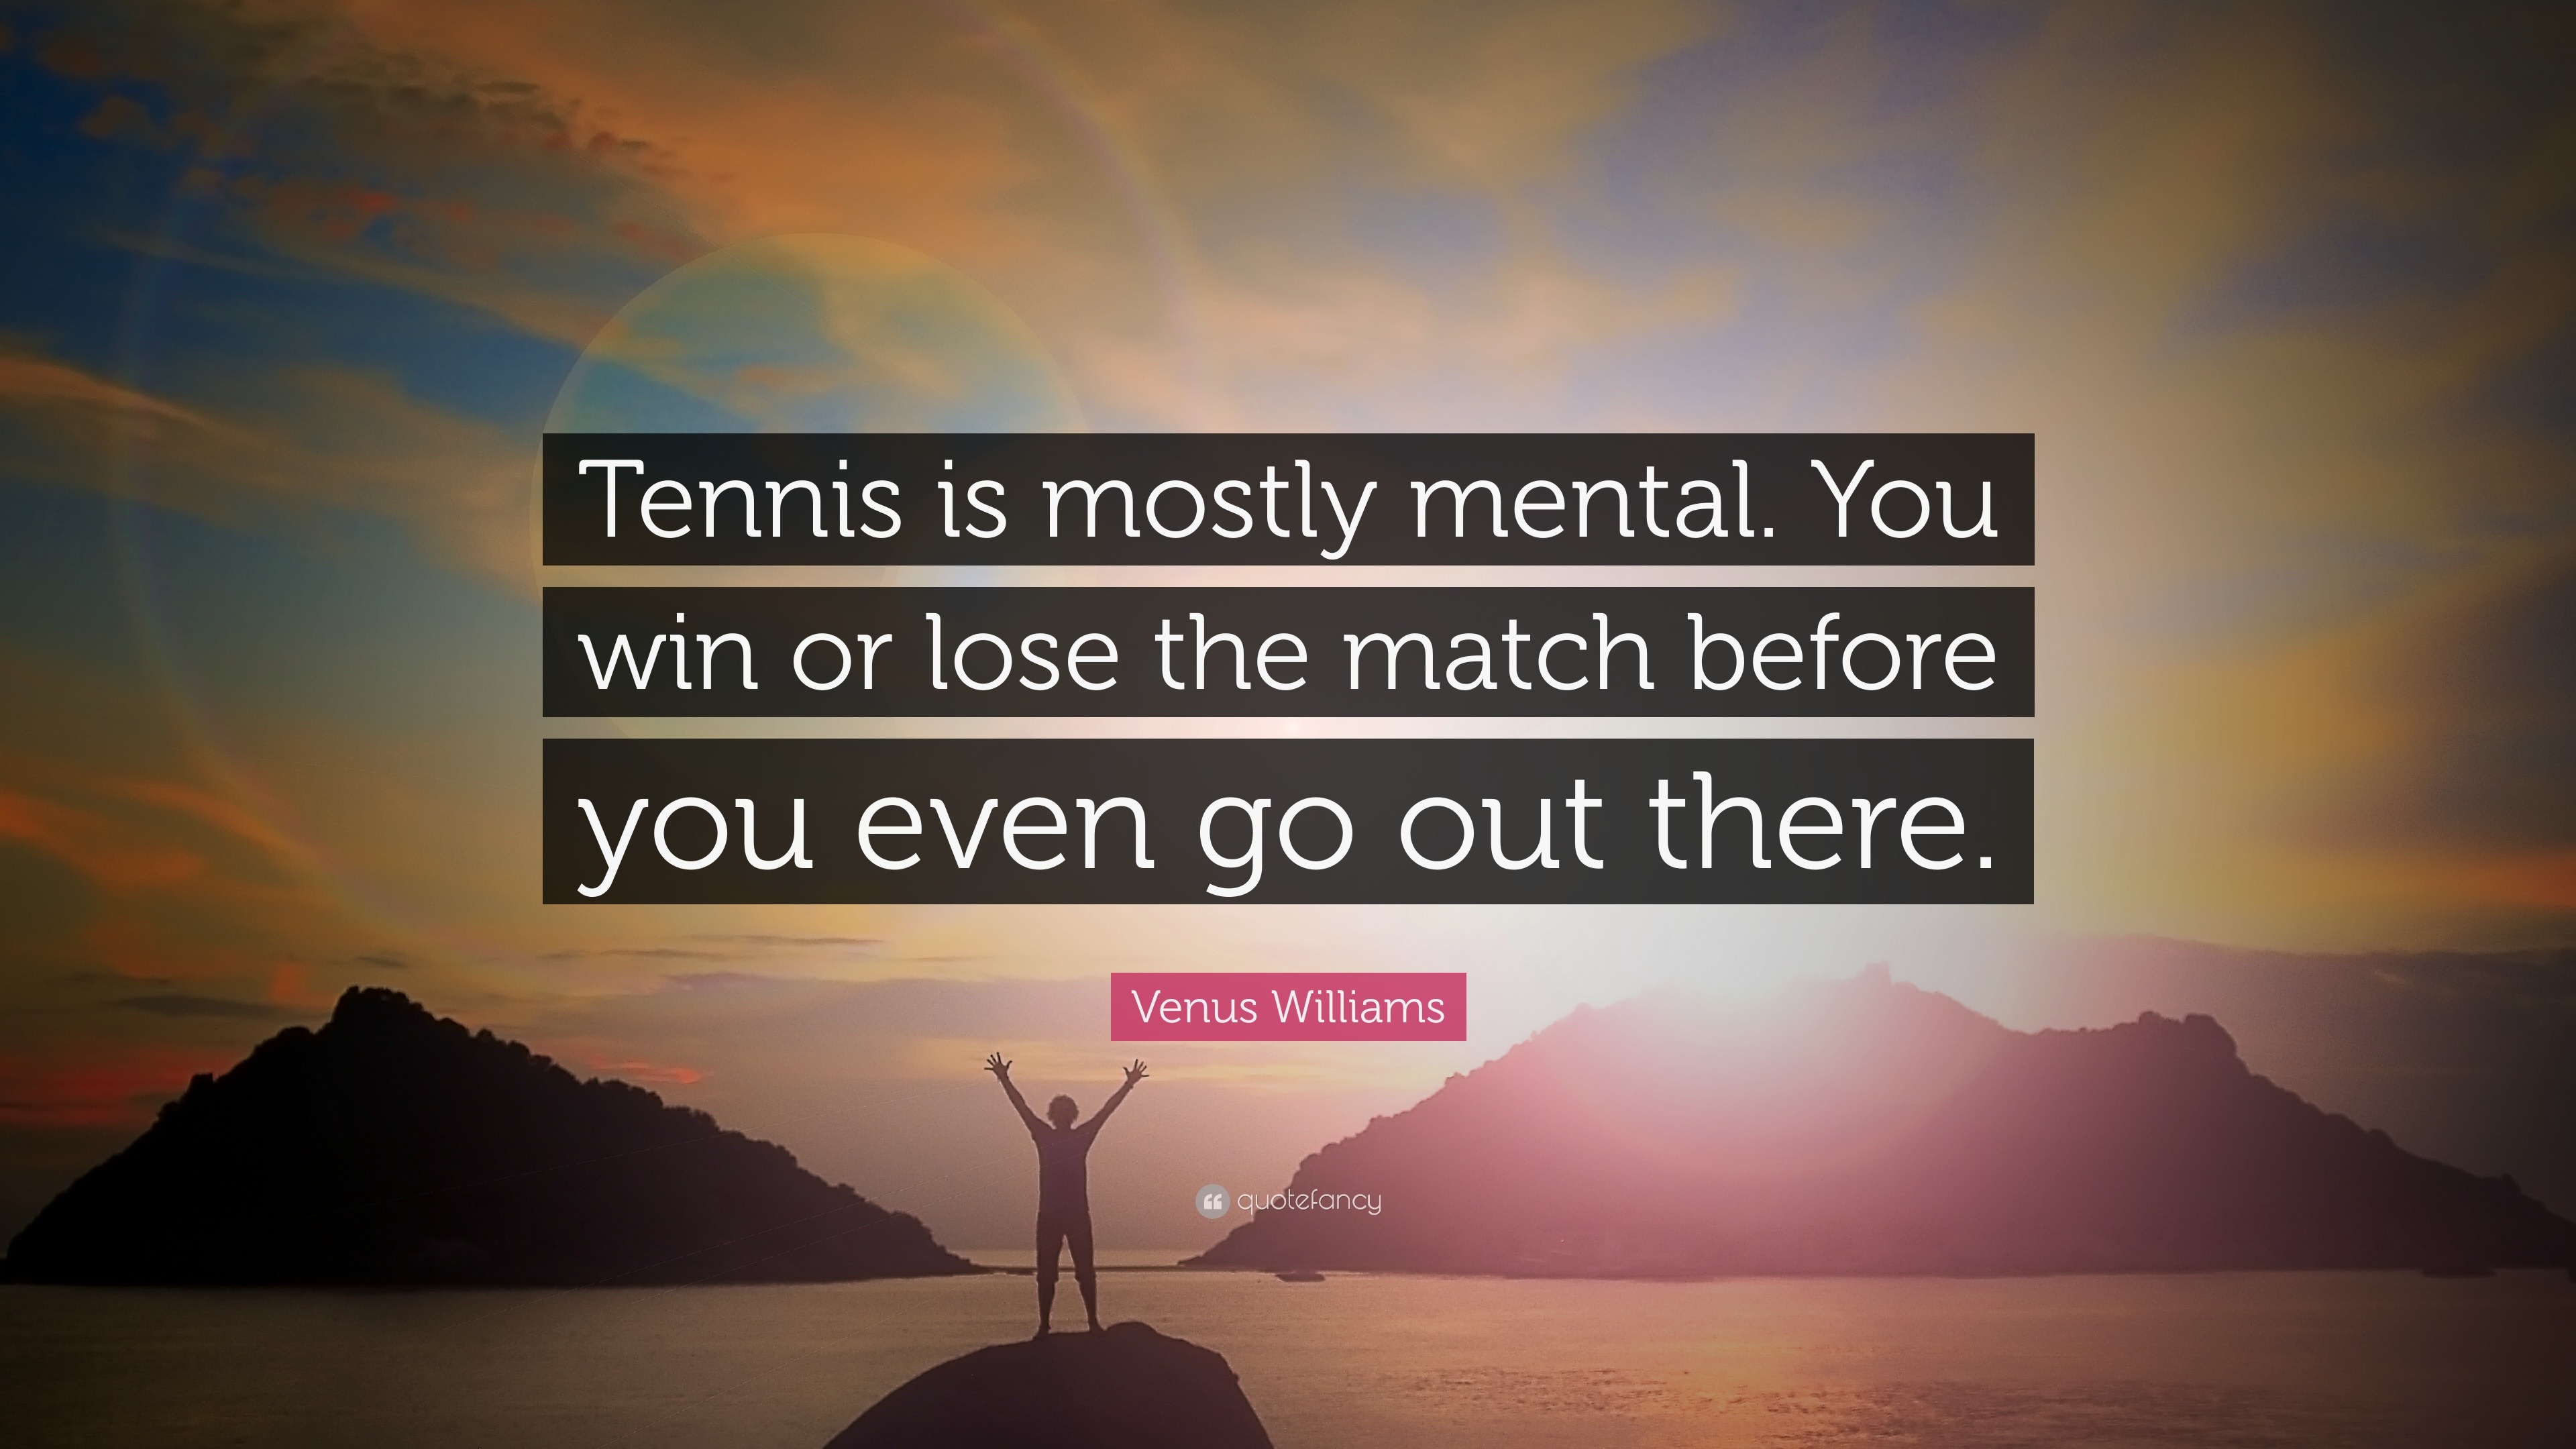 Venus Williams Quote: “Tennis is mostly mental. You win or lose the match before you ...